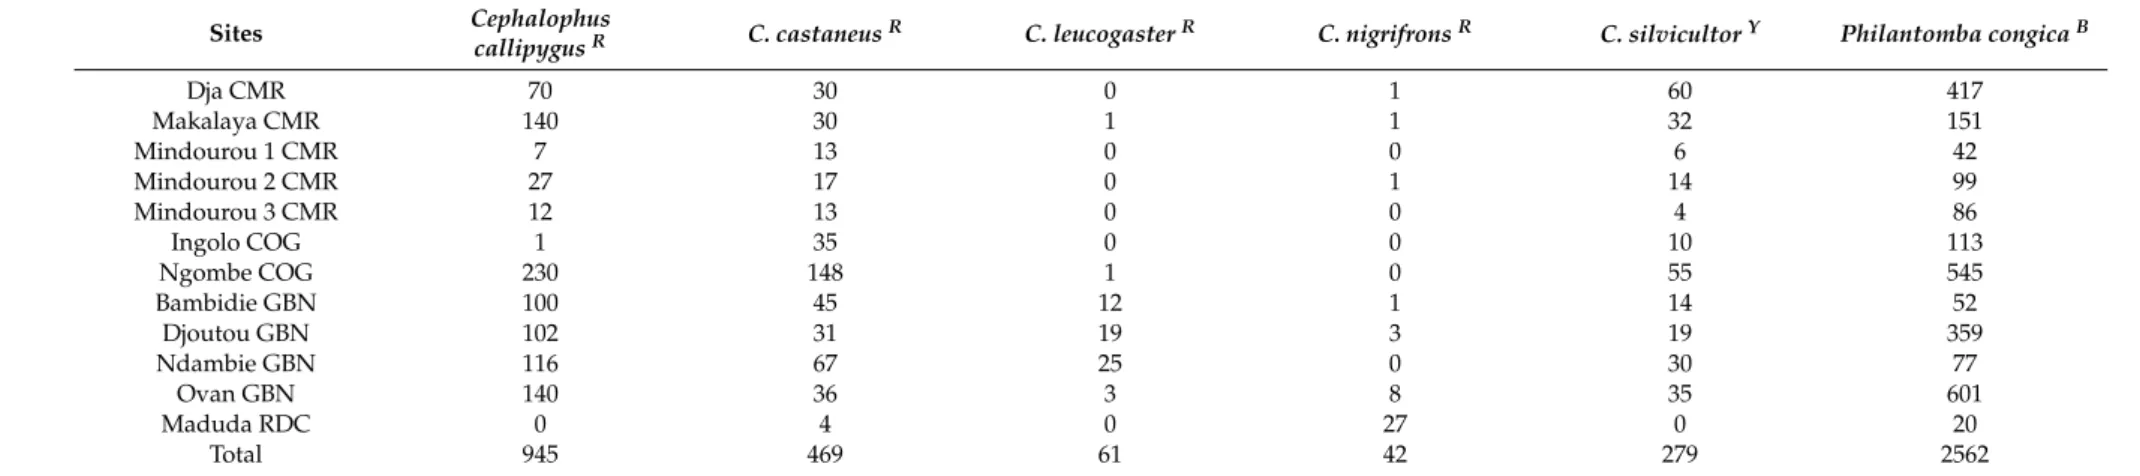 Table 1. Number of independent detection events per site and species.